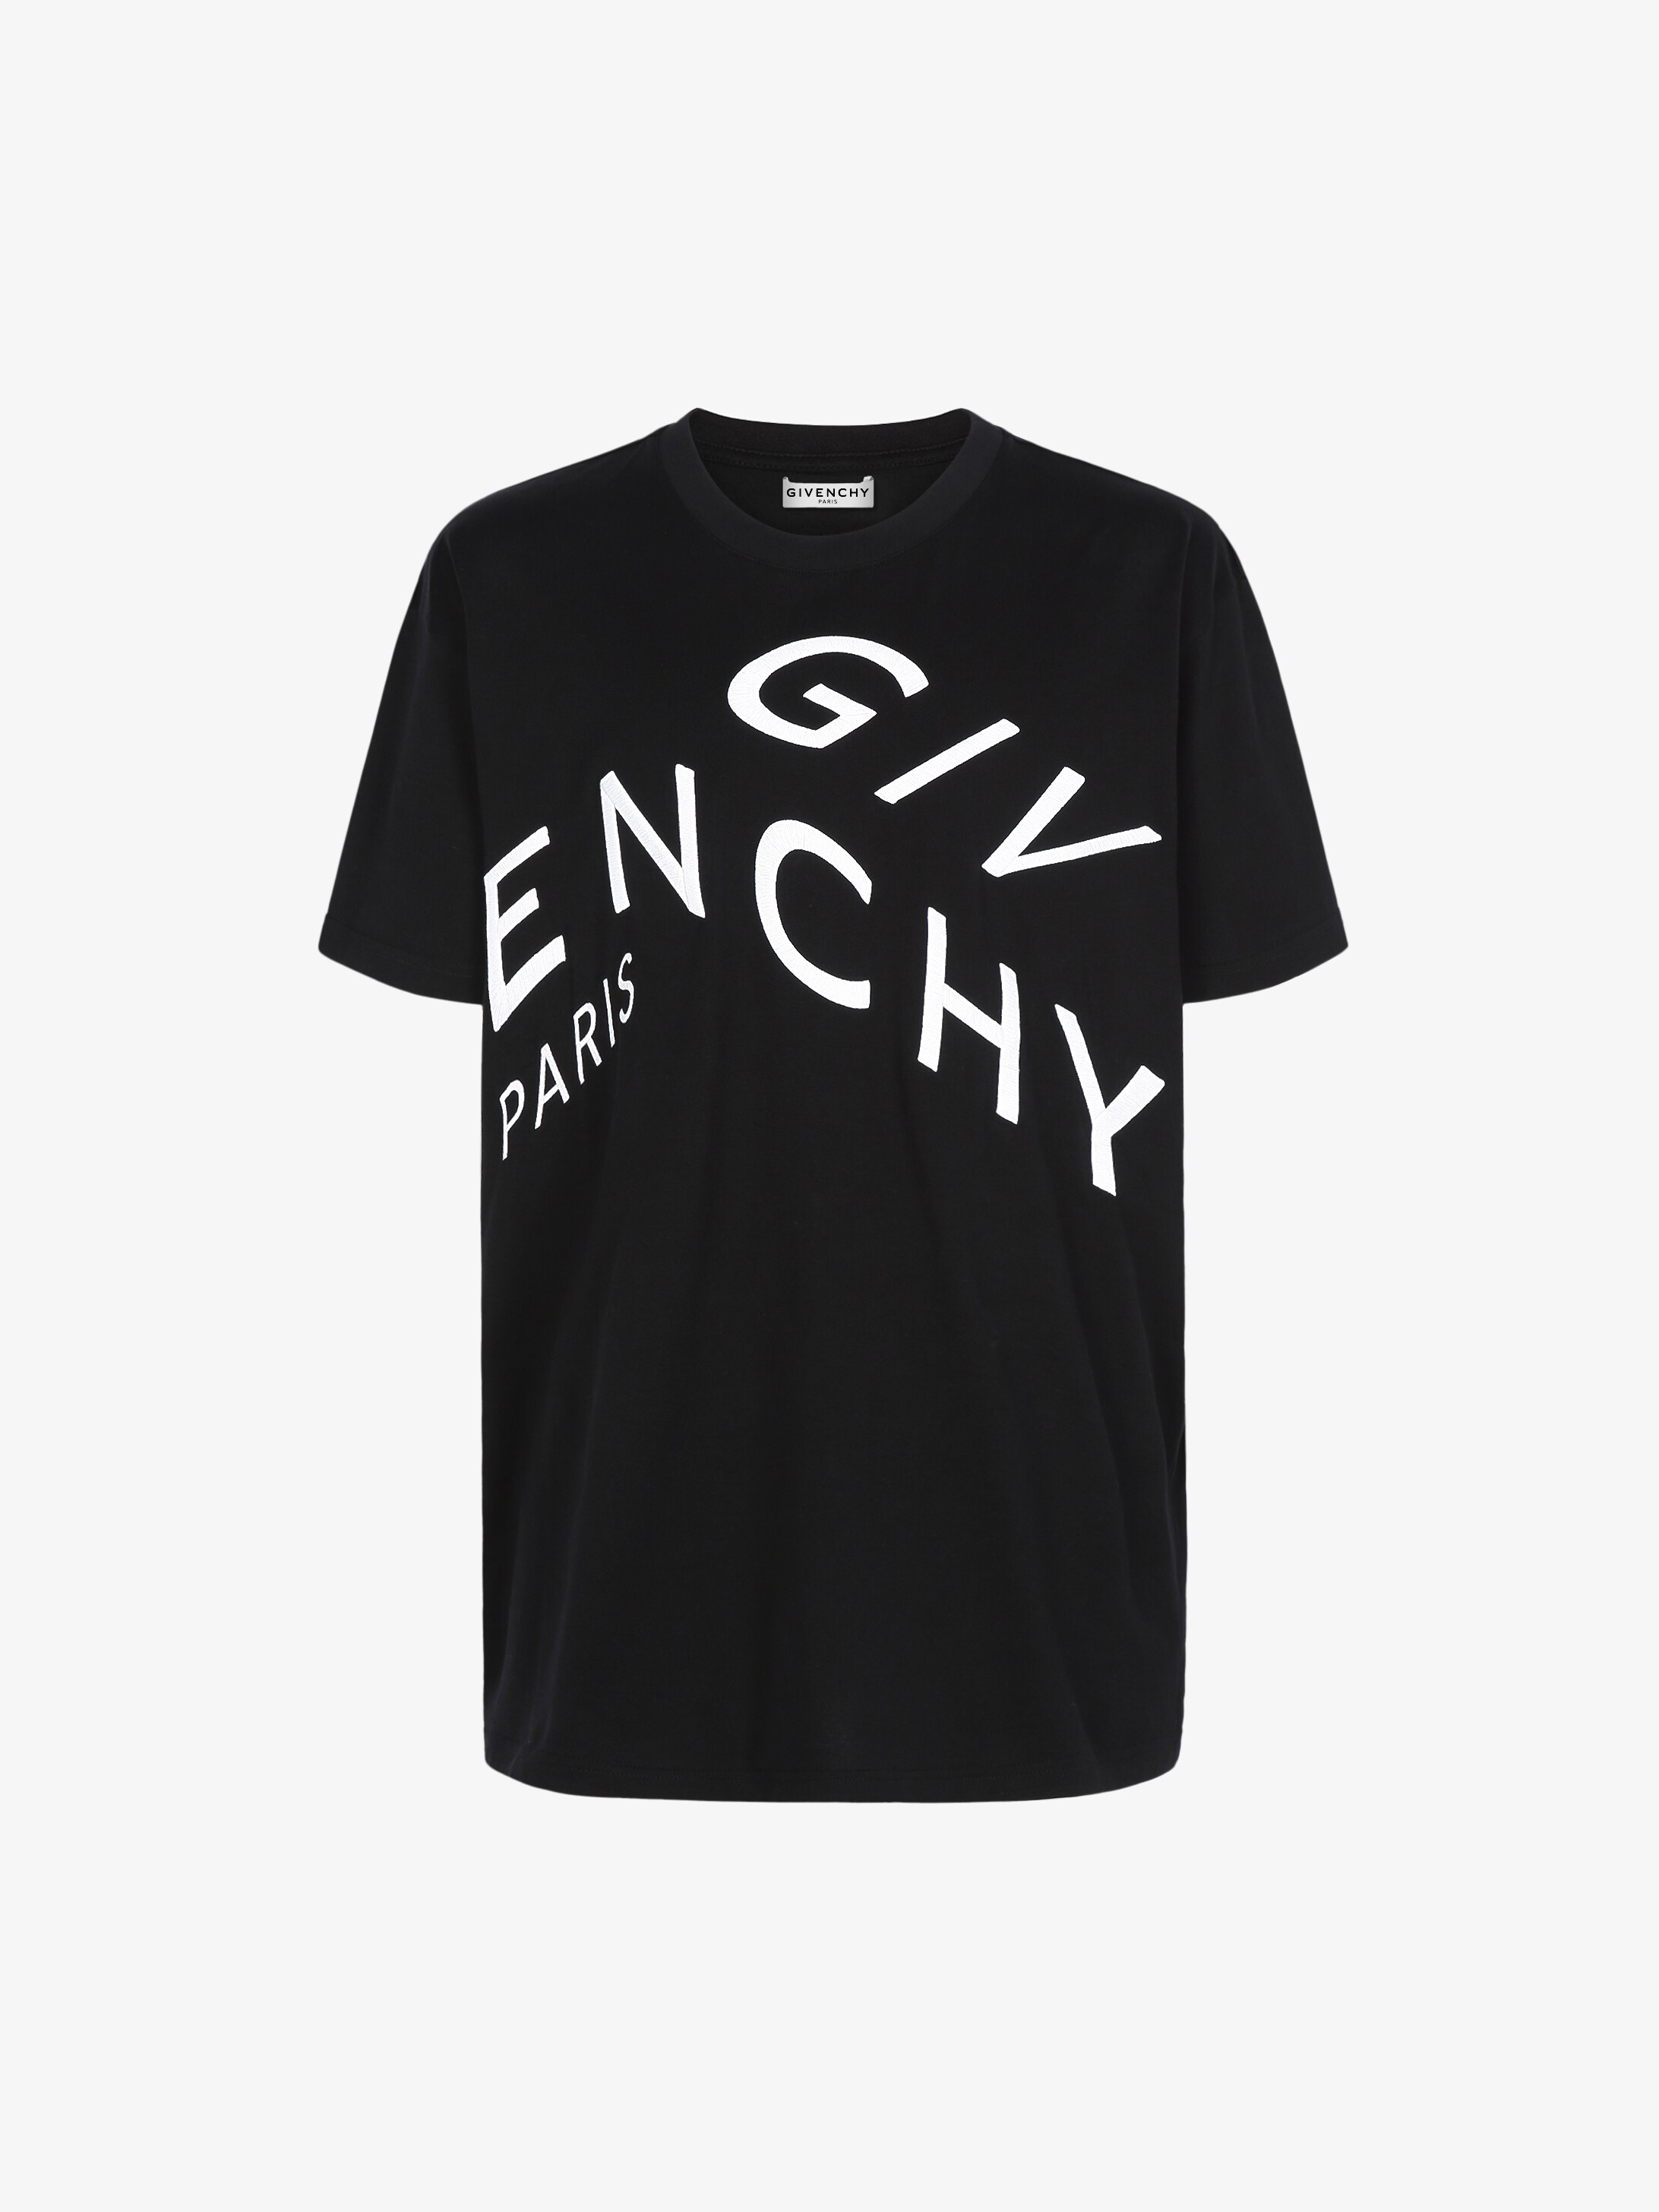 givenchy t shirt black and white